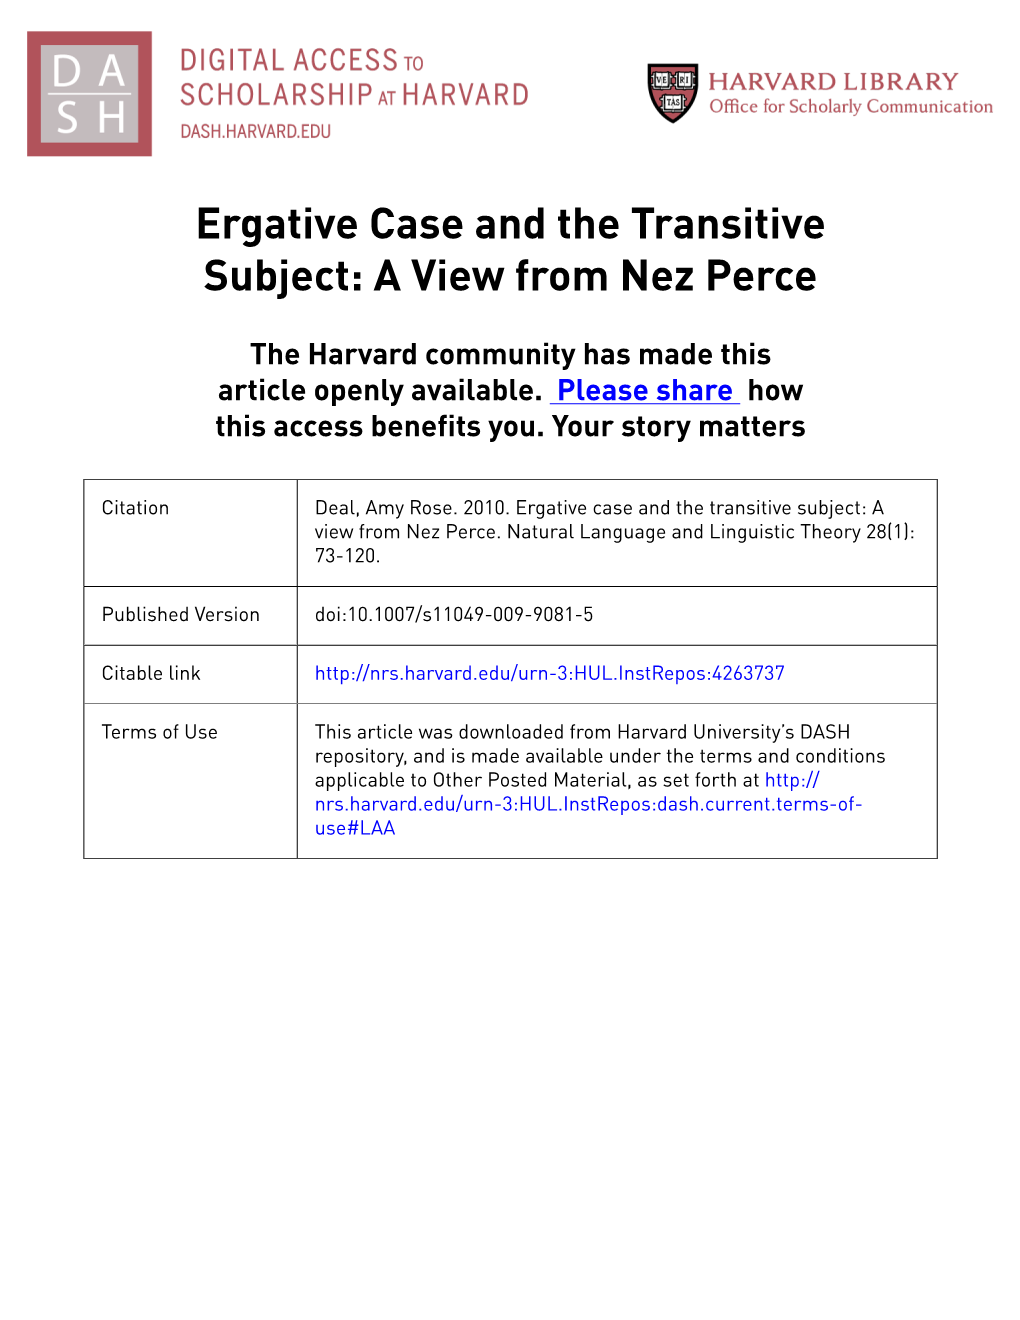 Ergative Case and the Transitive Subject: a View from Nez Perce